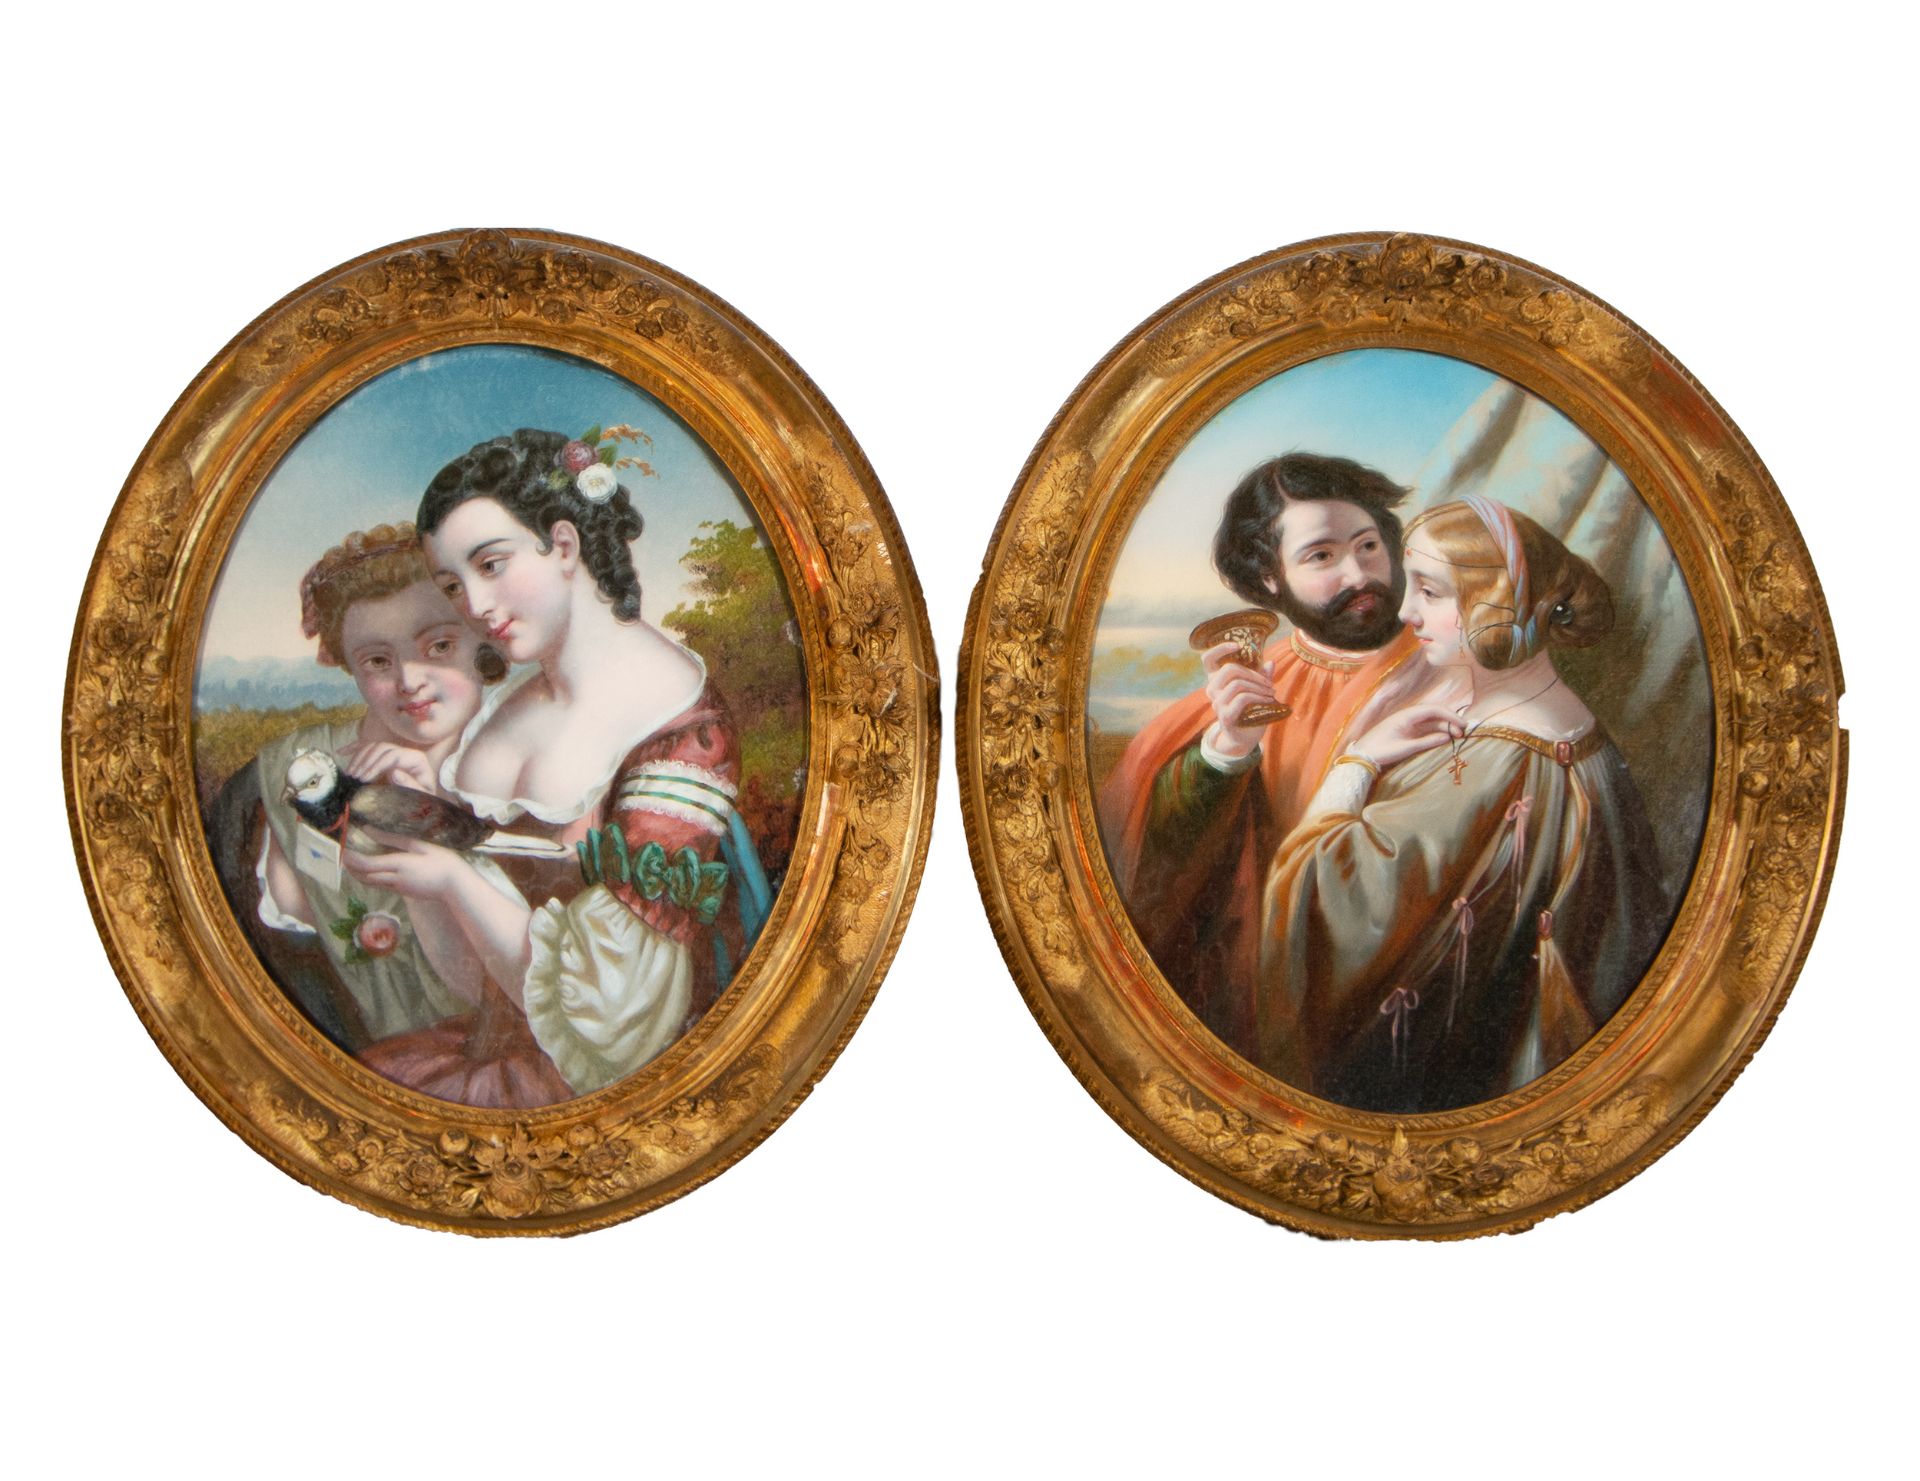 Pair of Ovals in Painted Glass representing Romantic Scenes, French romanticist school of the 19th c